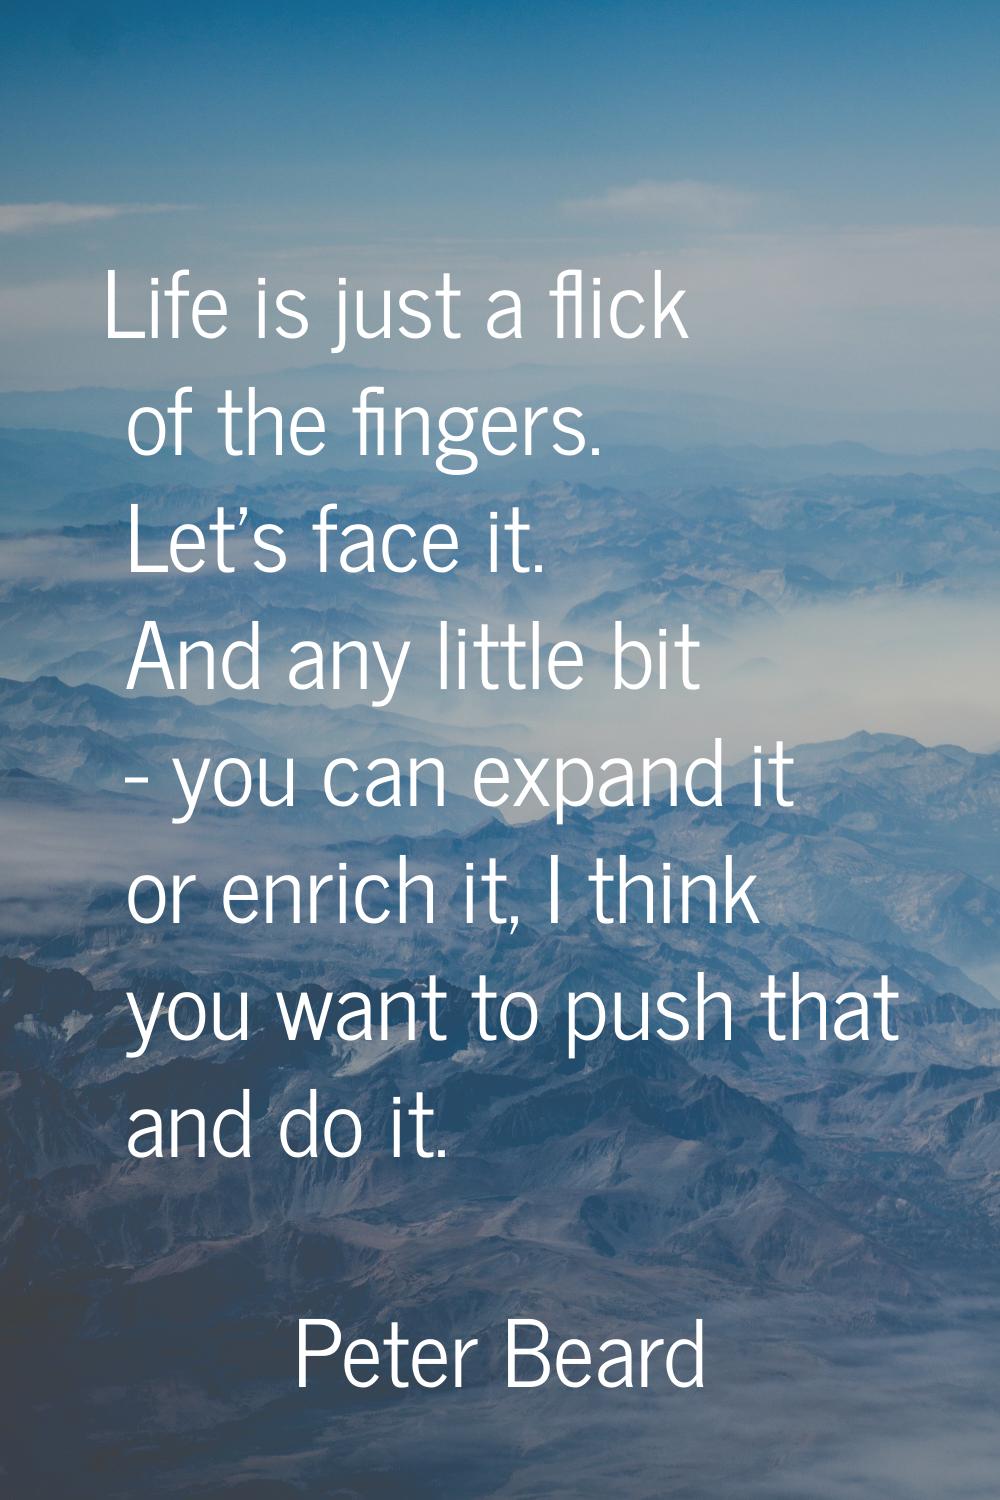 Life is just a flick of the fingers. Let's face it. And any little bit - you can expand it or enric